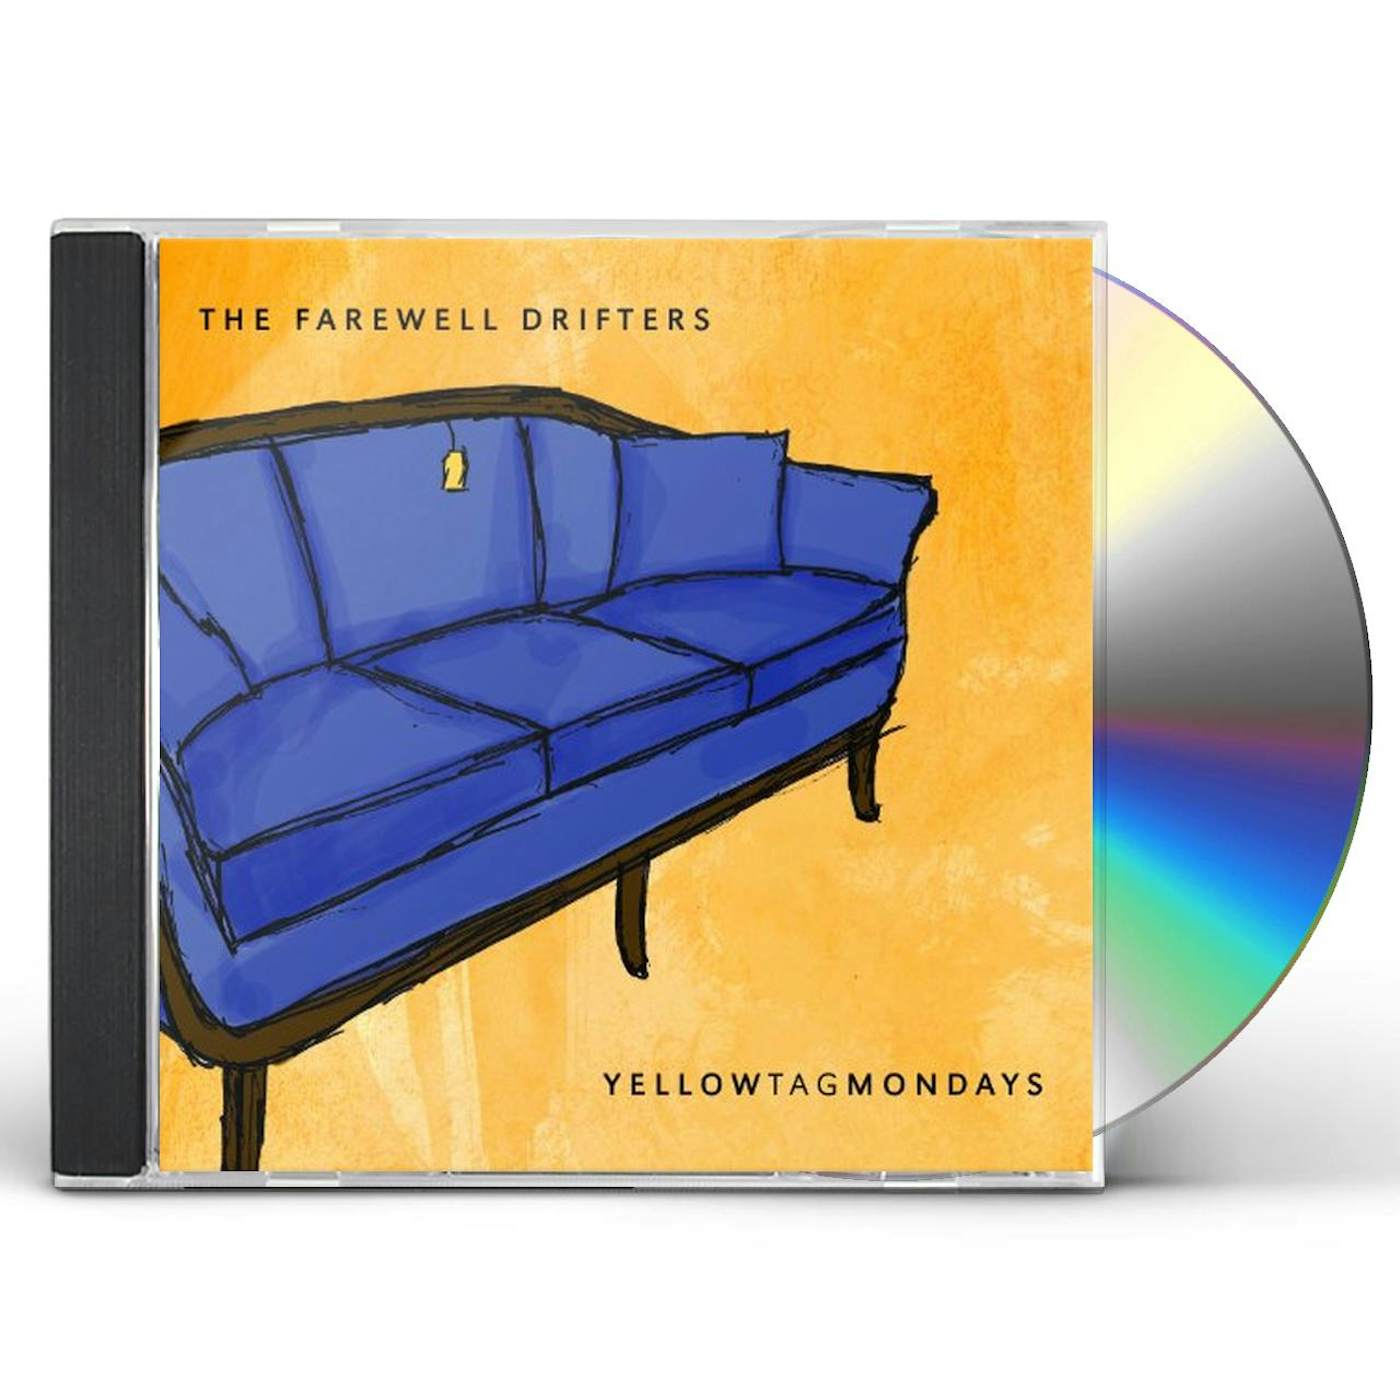 The Farewell Drifters YELLOW TAG MONDAYS CD